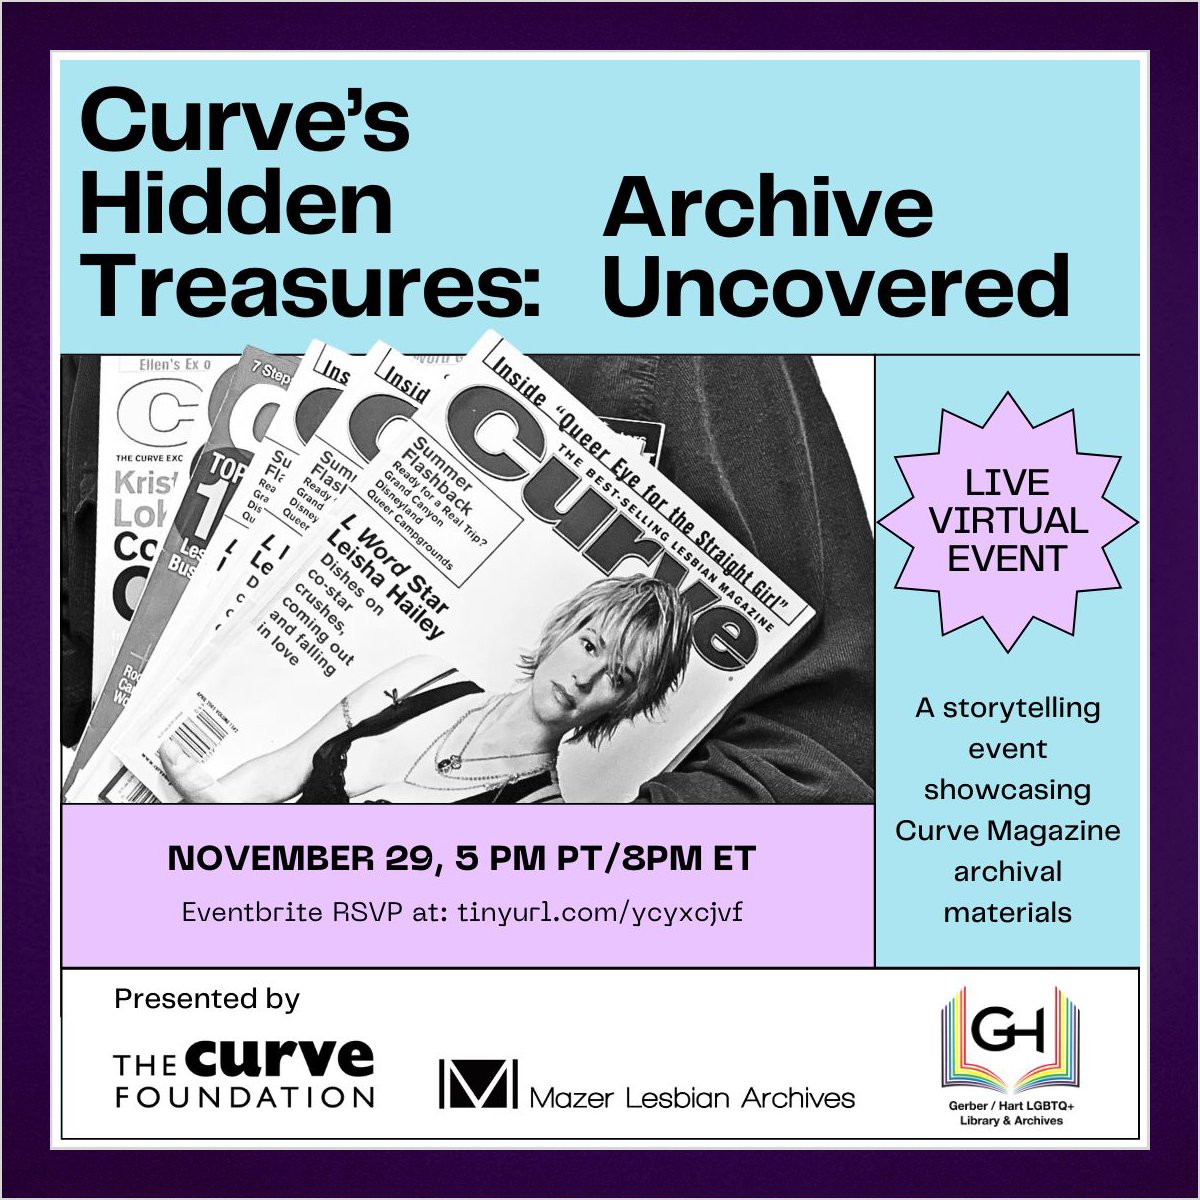 ⏰ Don't miss the chance to RSVP for tonight's FREE virtual event, showcasing Curve's archival material housed at The June Mazer Lesbian Archives, Gerber/Hart Library & Archives, & from Franco's own collection! 💜 WHEN: Wed, Nov 29, 5pm PT/8pm ET RSVP: 👉 tinyurl.com/ycyxcjvf